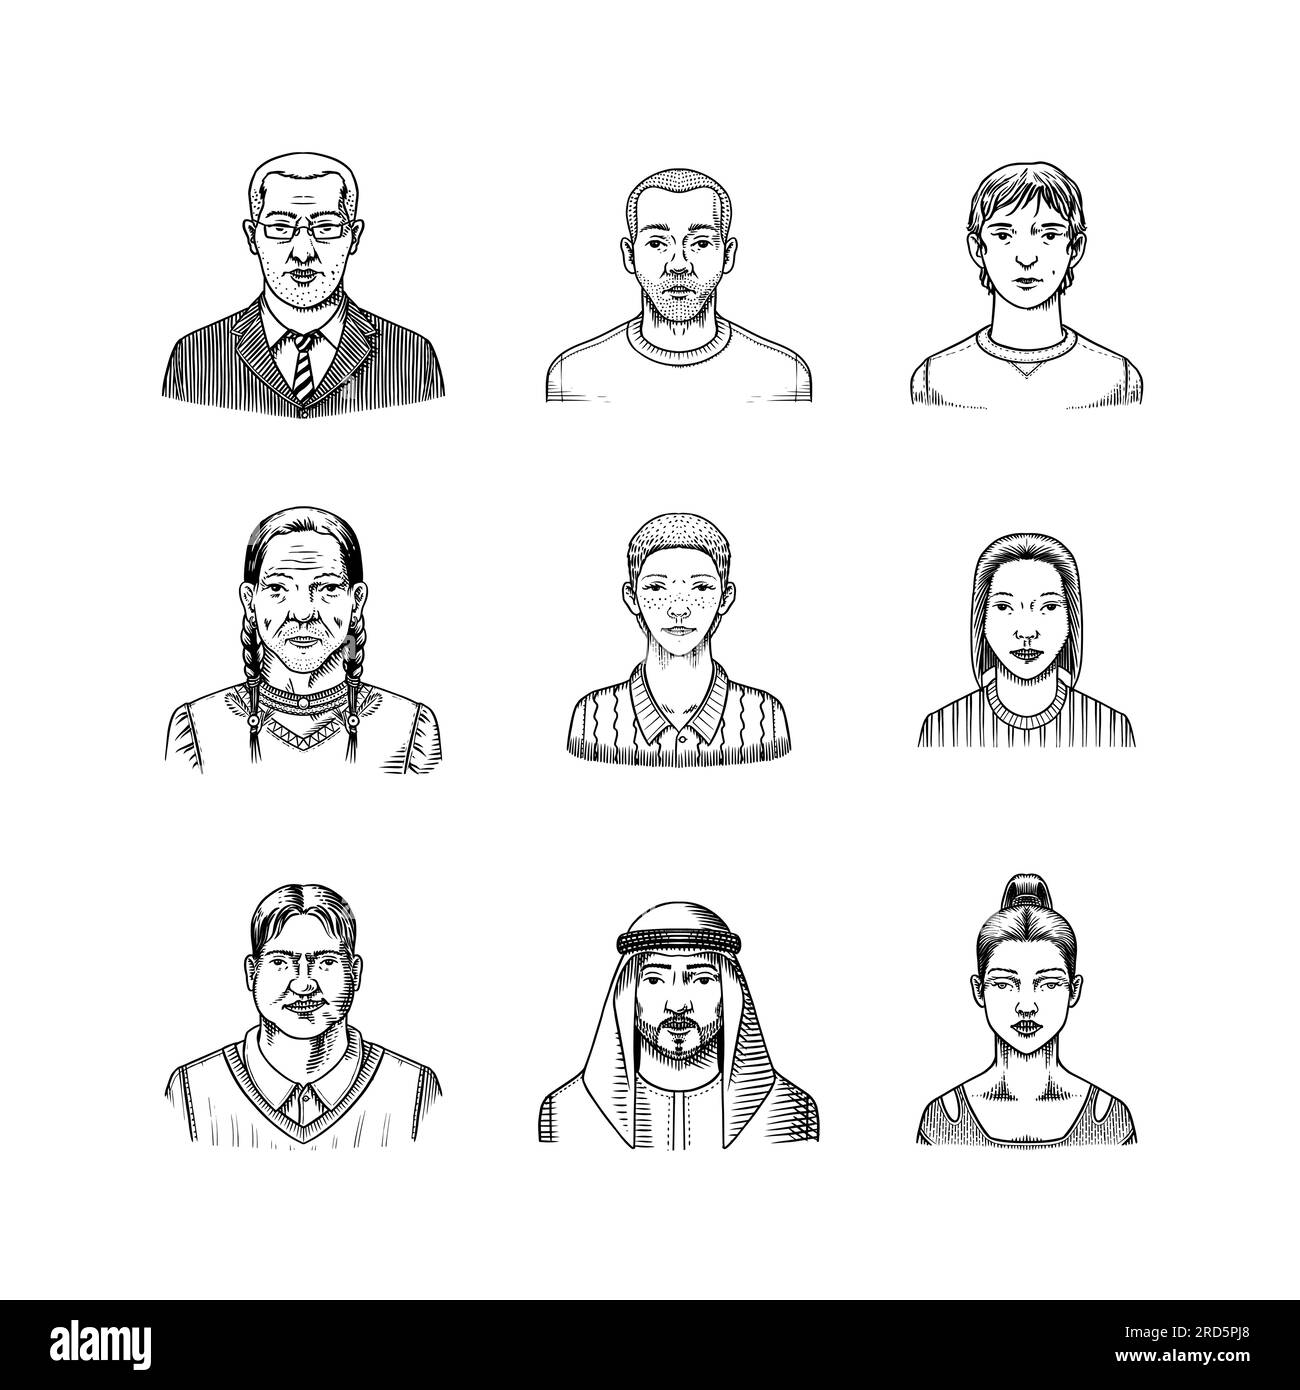 Human Avatars Collection. Diverse faces of people. Characters set. Happy emotions. Portrait for social media, website. Men and women, grandparents and Stock Vector